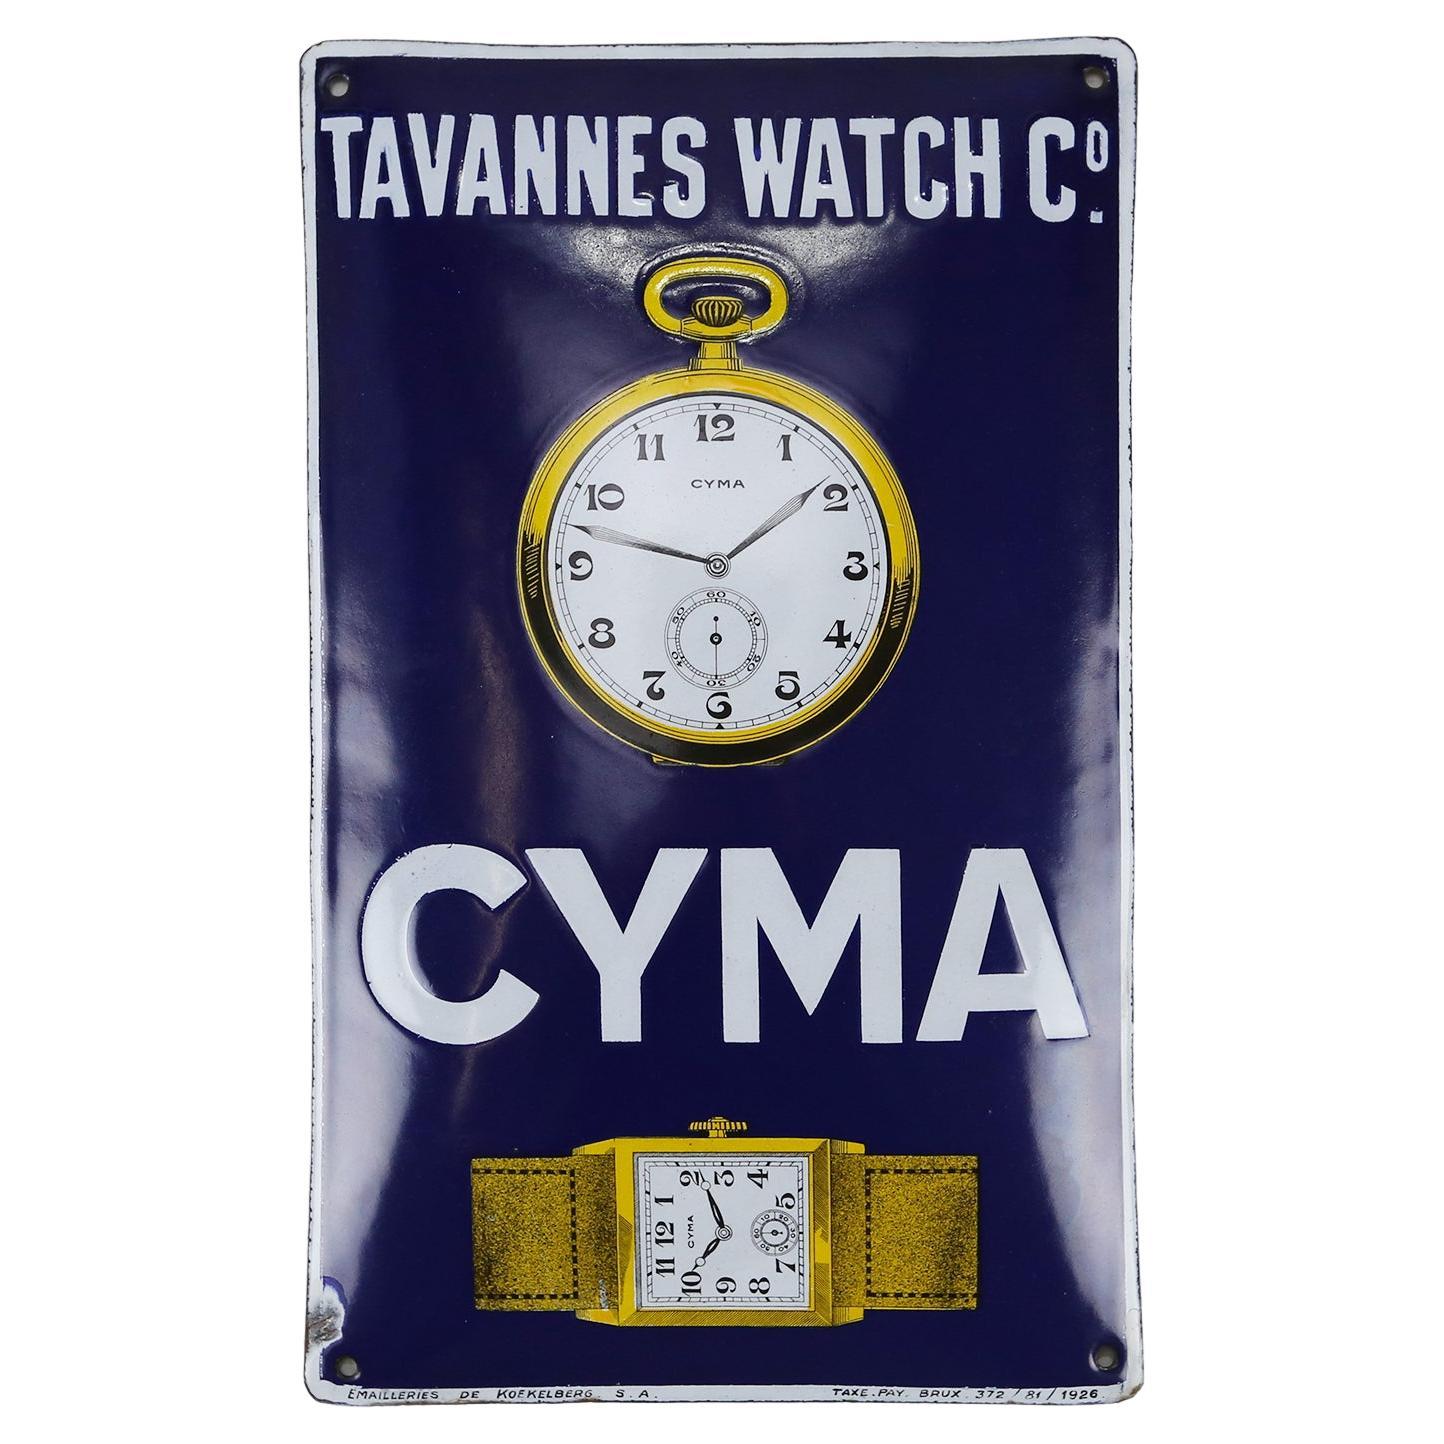 Cyma emanel advertising sign 1926 For Sale